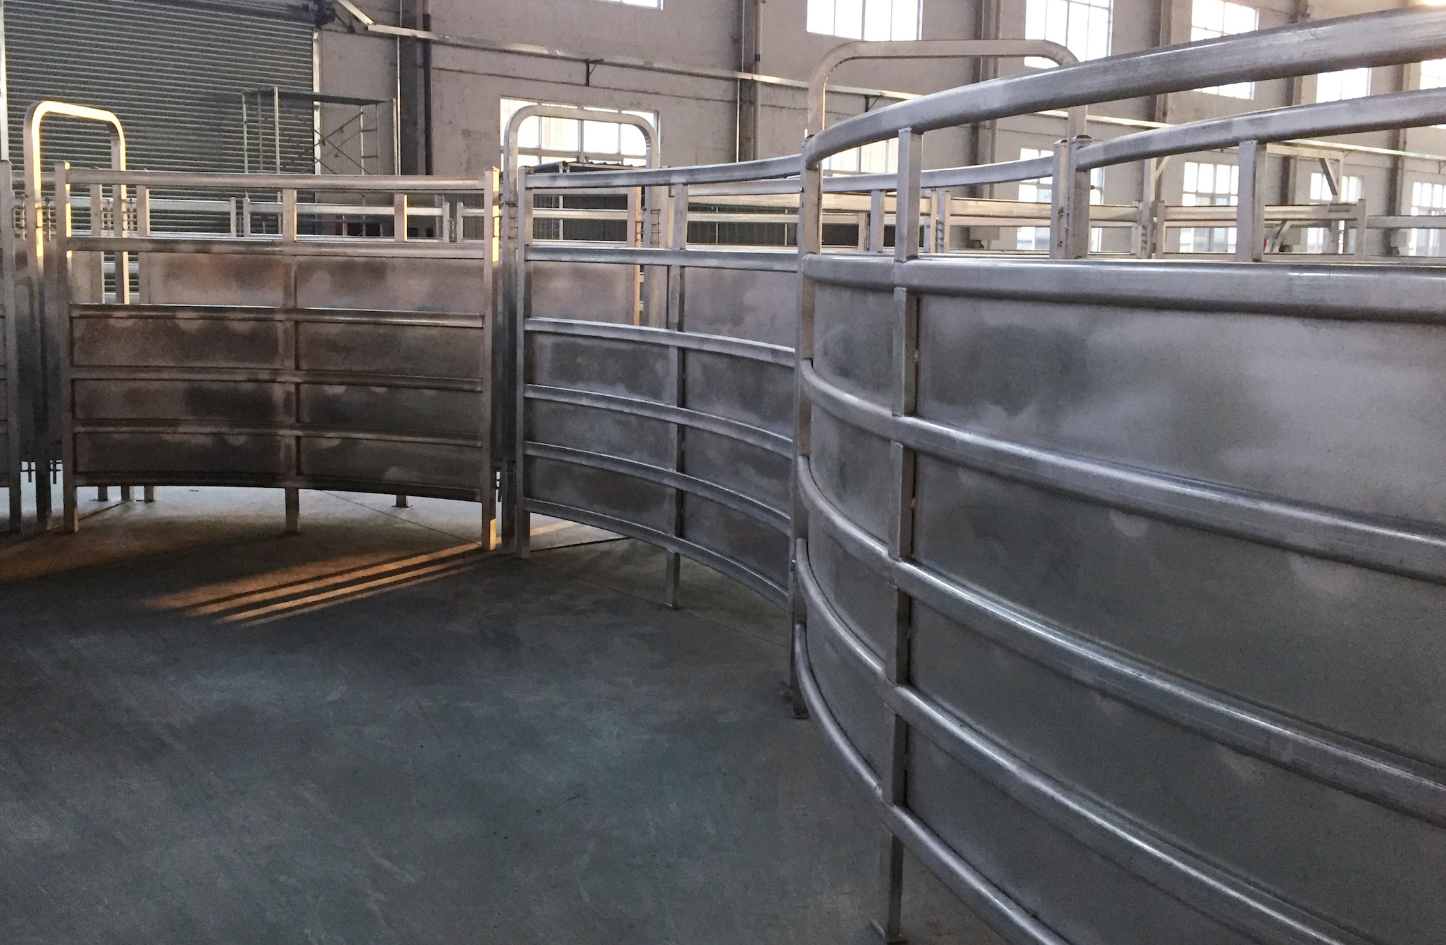 Livestock Cattle Curved Race Panels